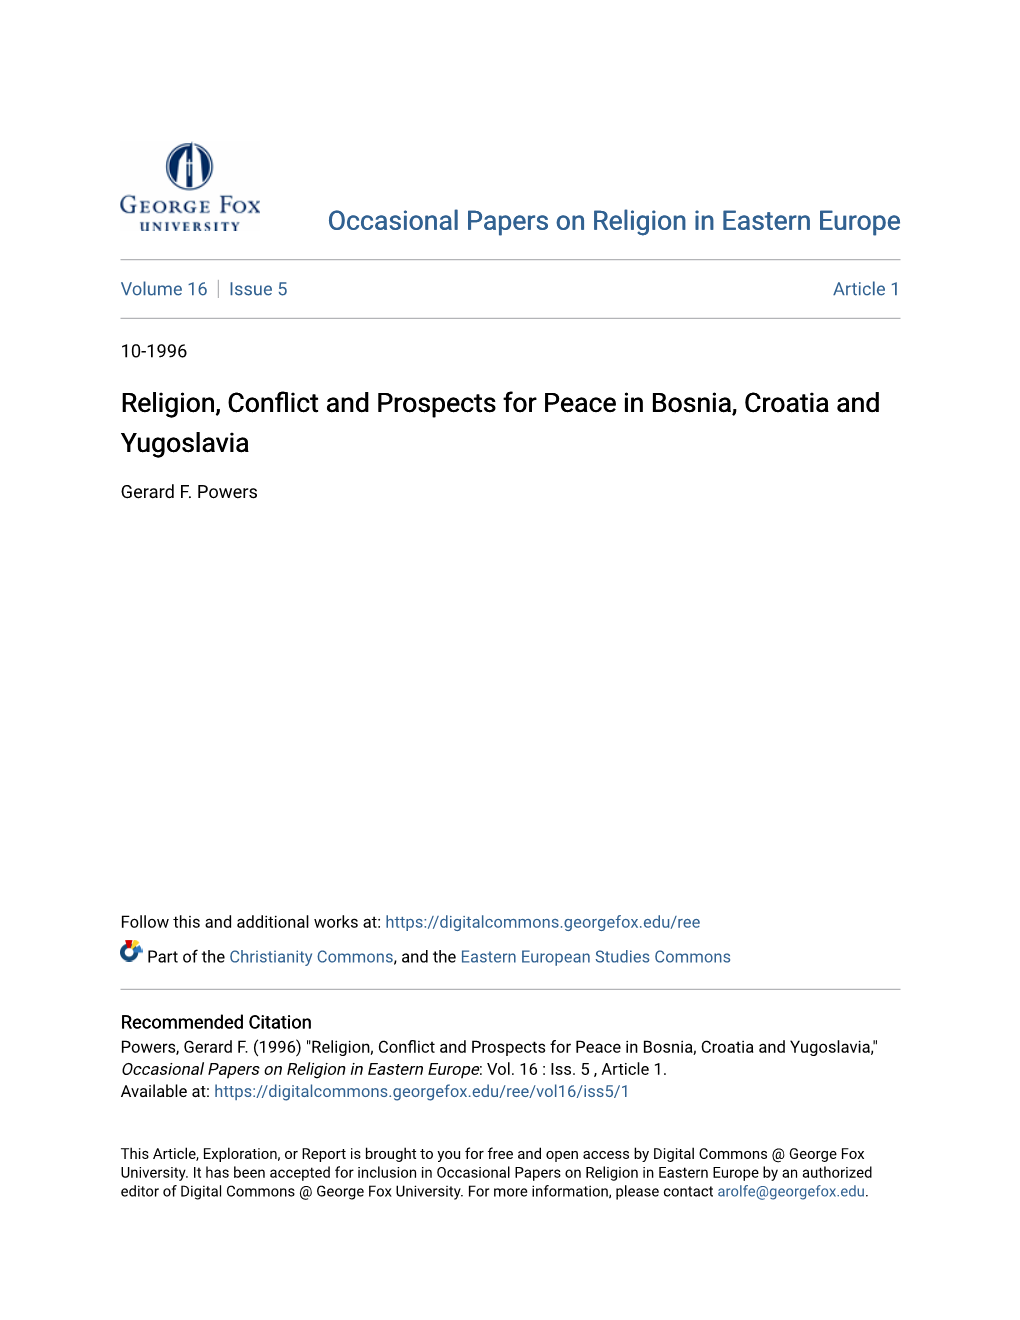 Religion, Conflict and Prospects for Peace in Bosnia, Croatia and Yugoslavia